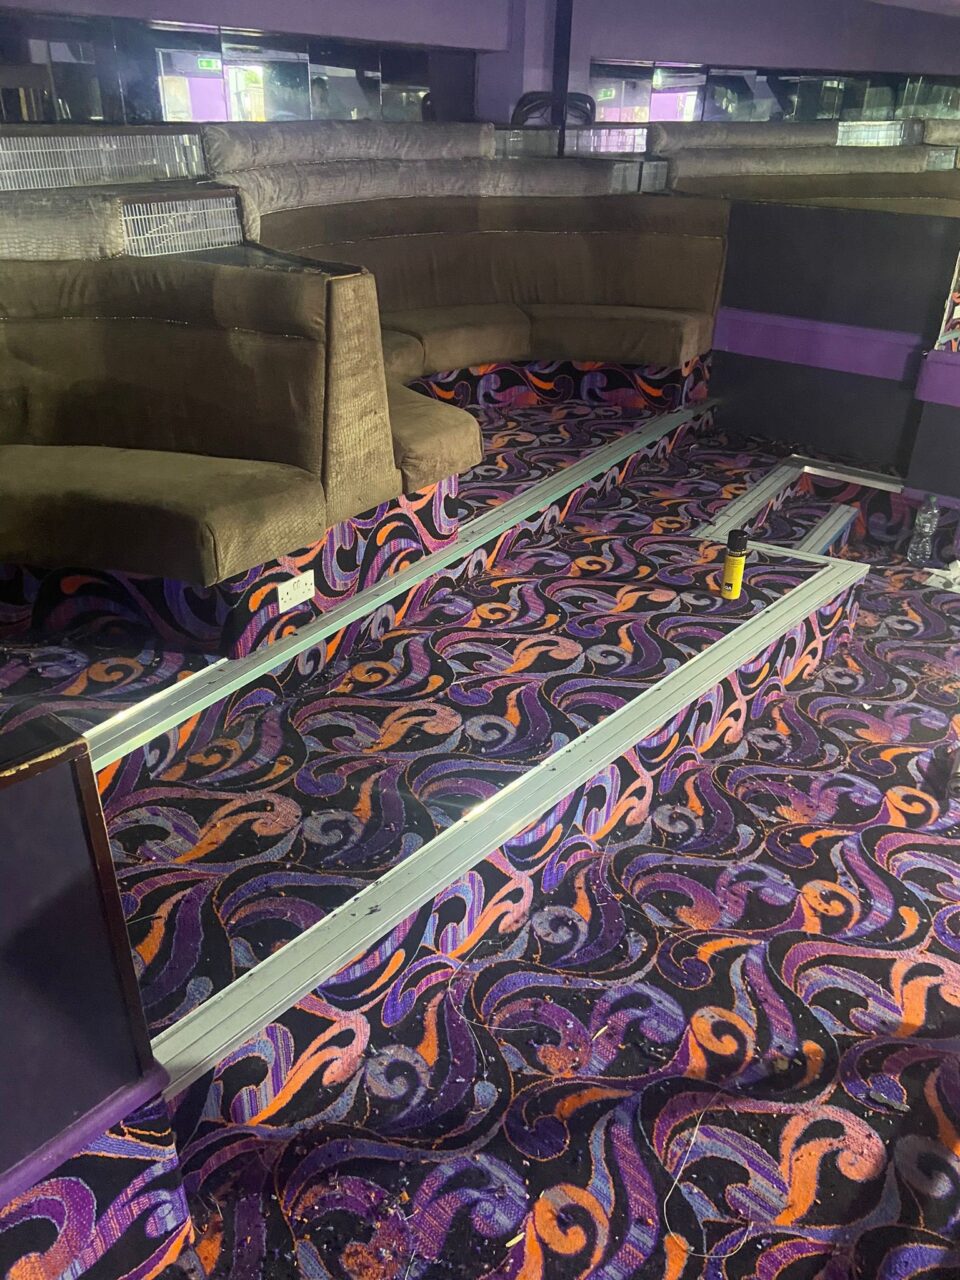 Acapulco Nightclub Halifax seating area with bespoke purple and black patterned carpets designed by Wilton Carpets